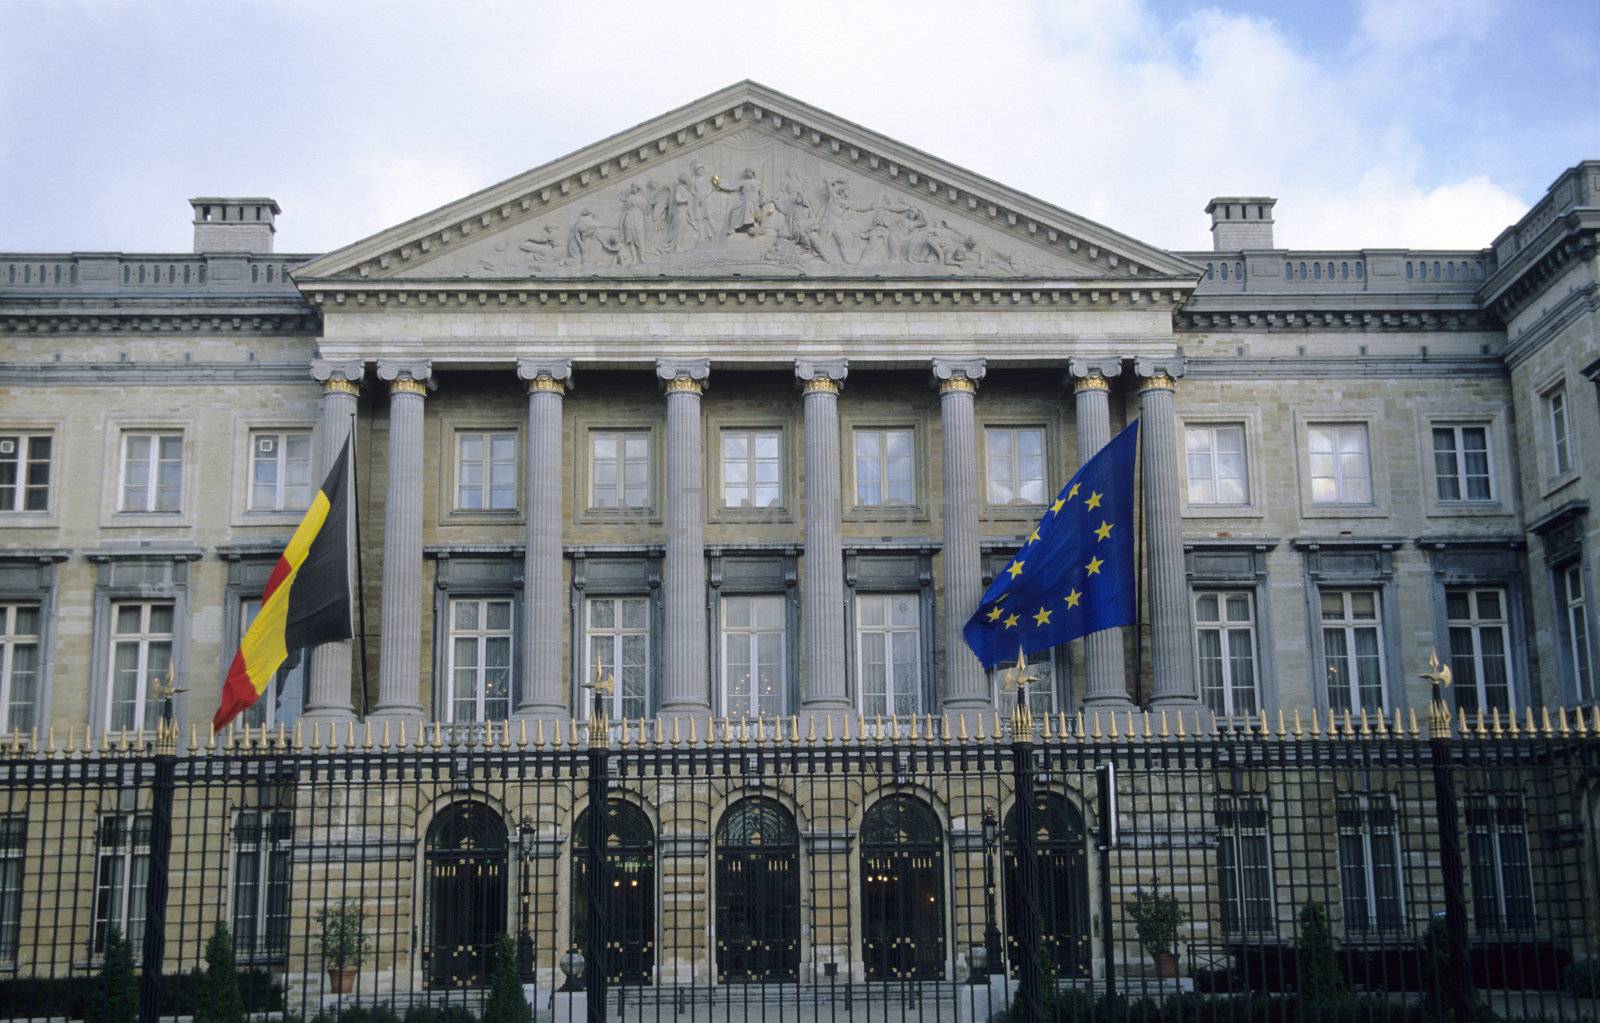 The Belgian Parliament Building with Belgian and European Union flags.